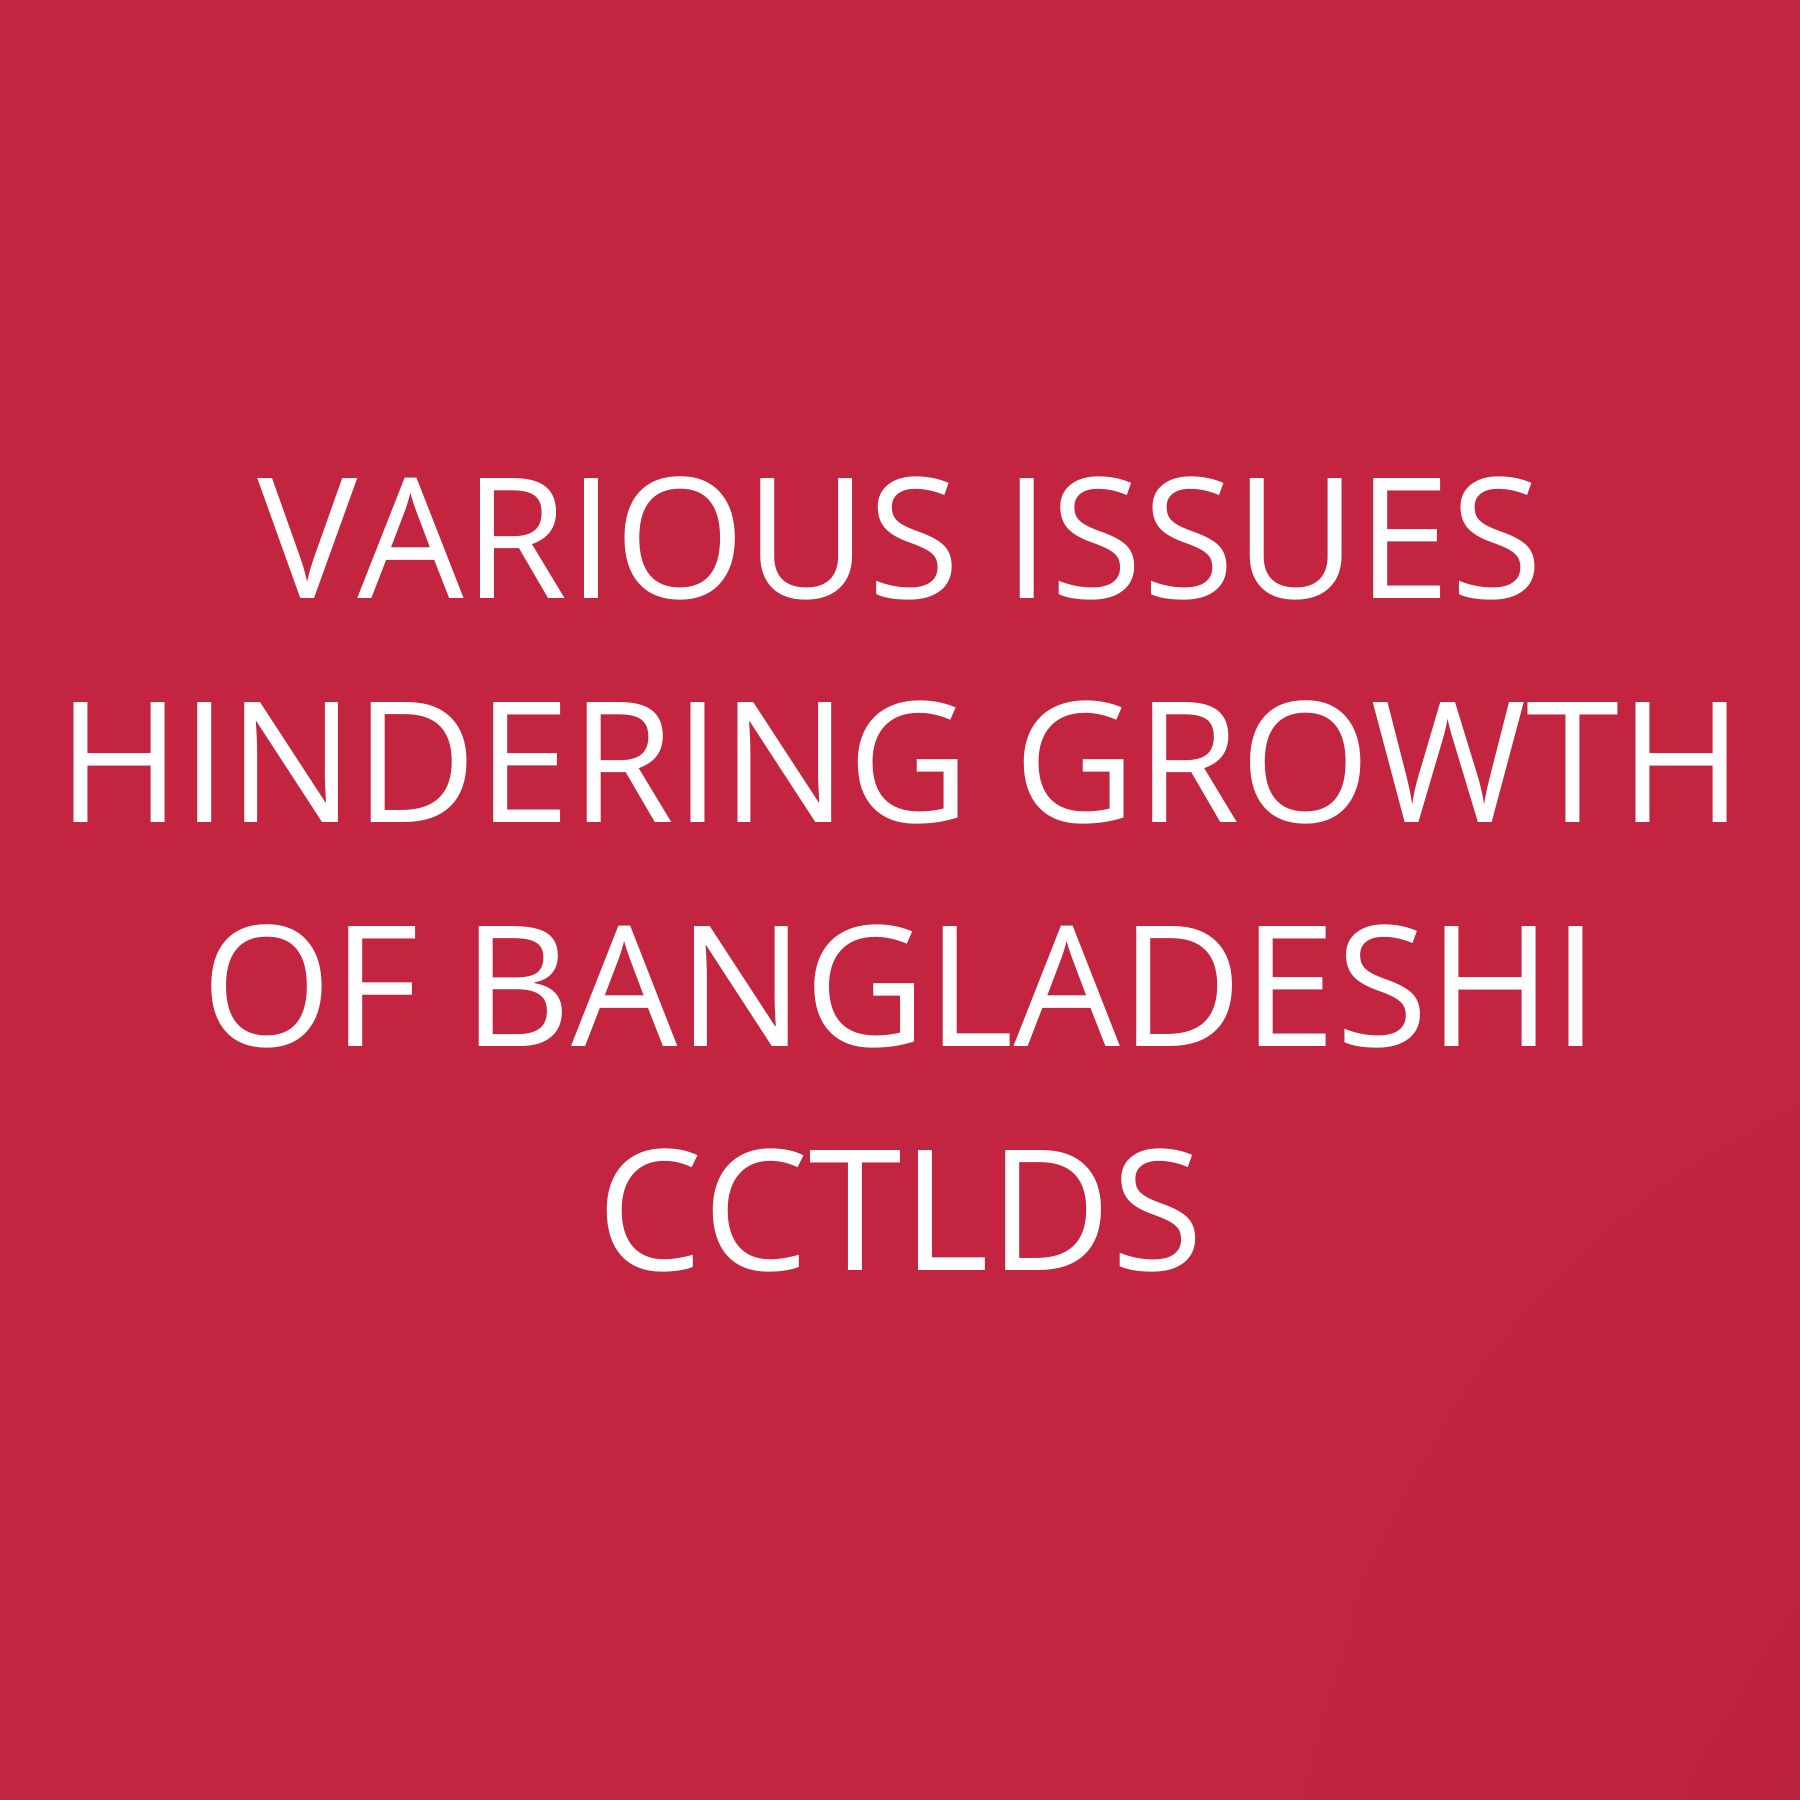 Various issues hindering growth of Bangladeshi ccTLDs